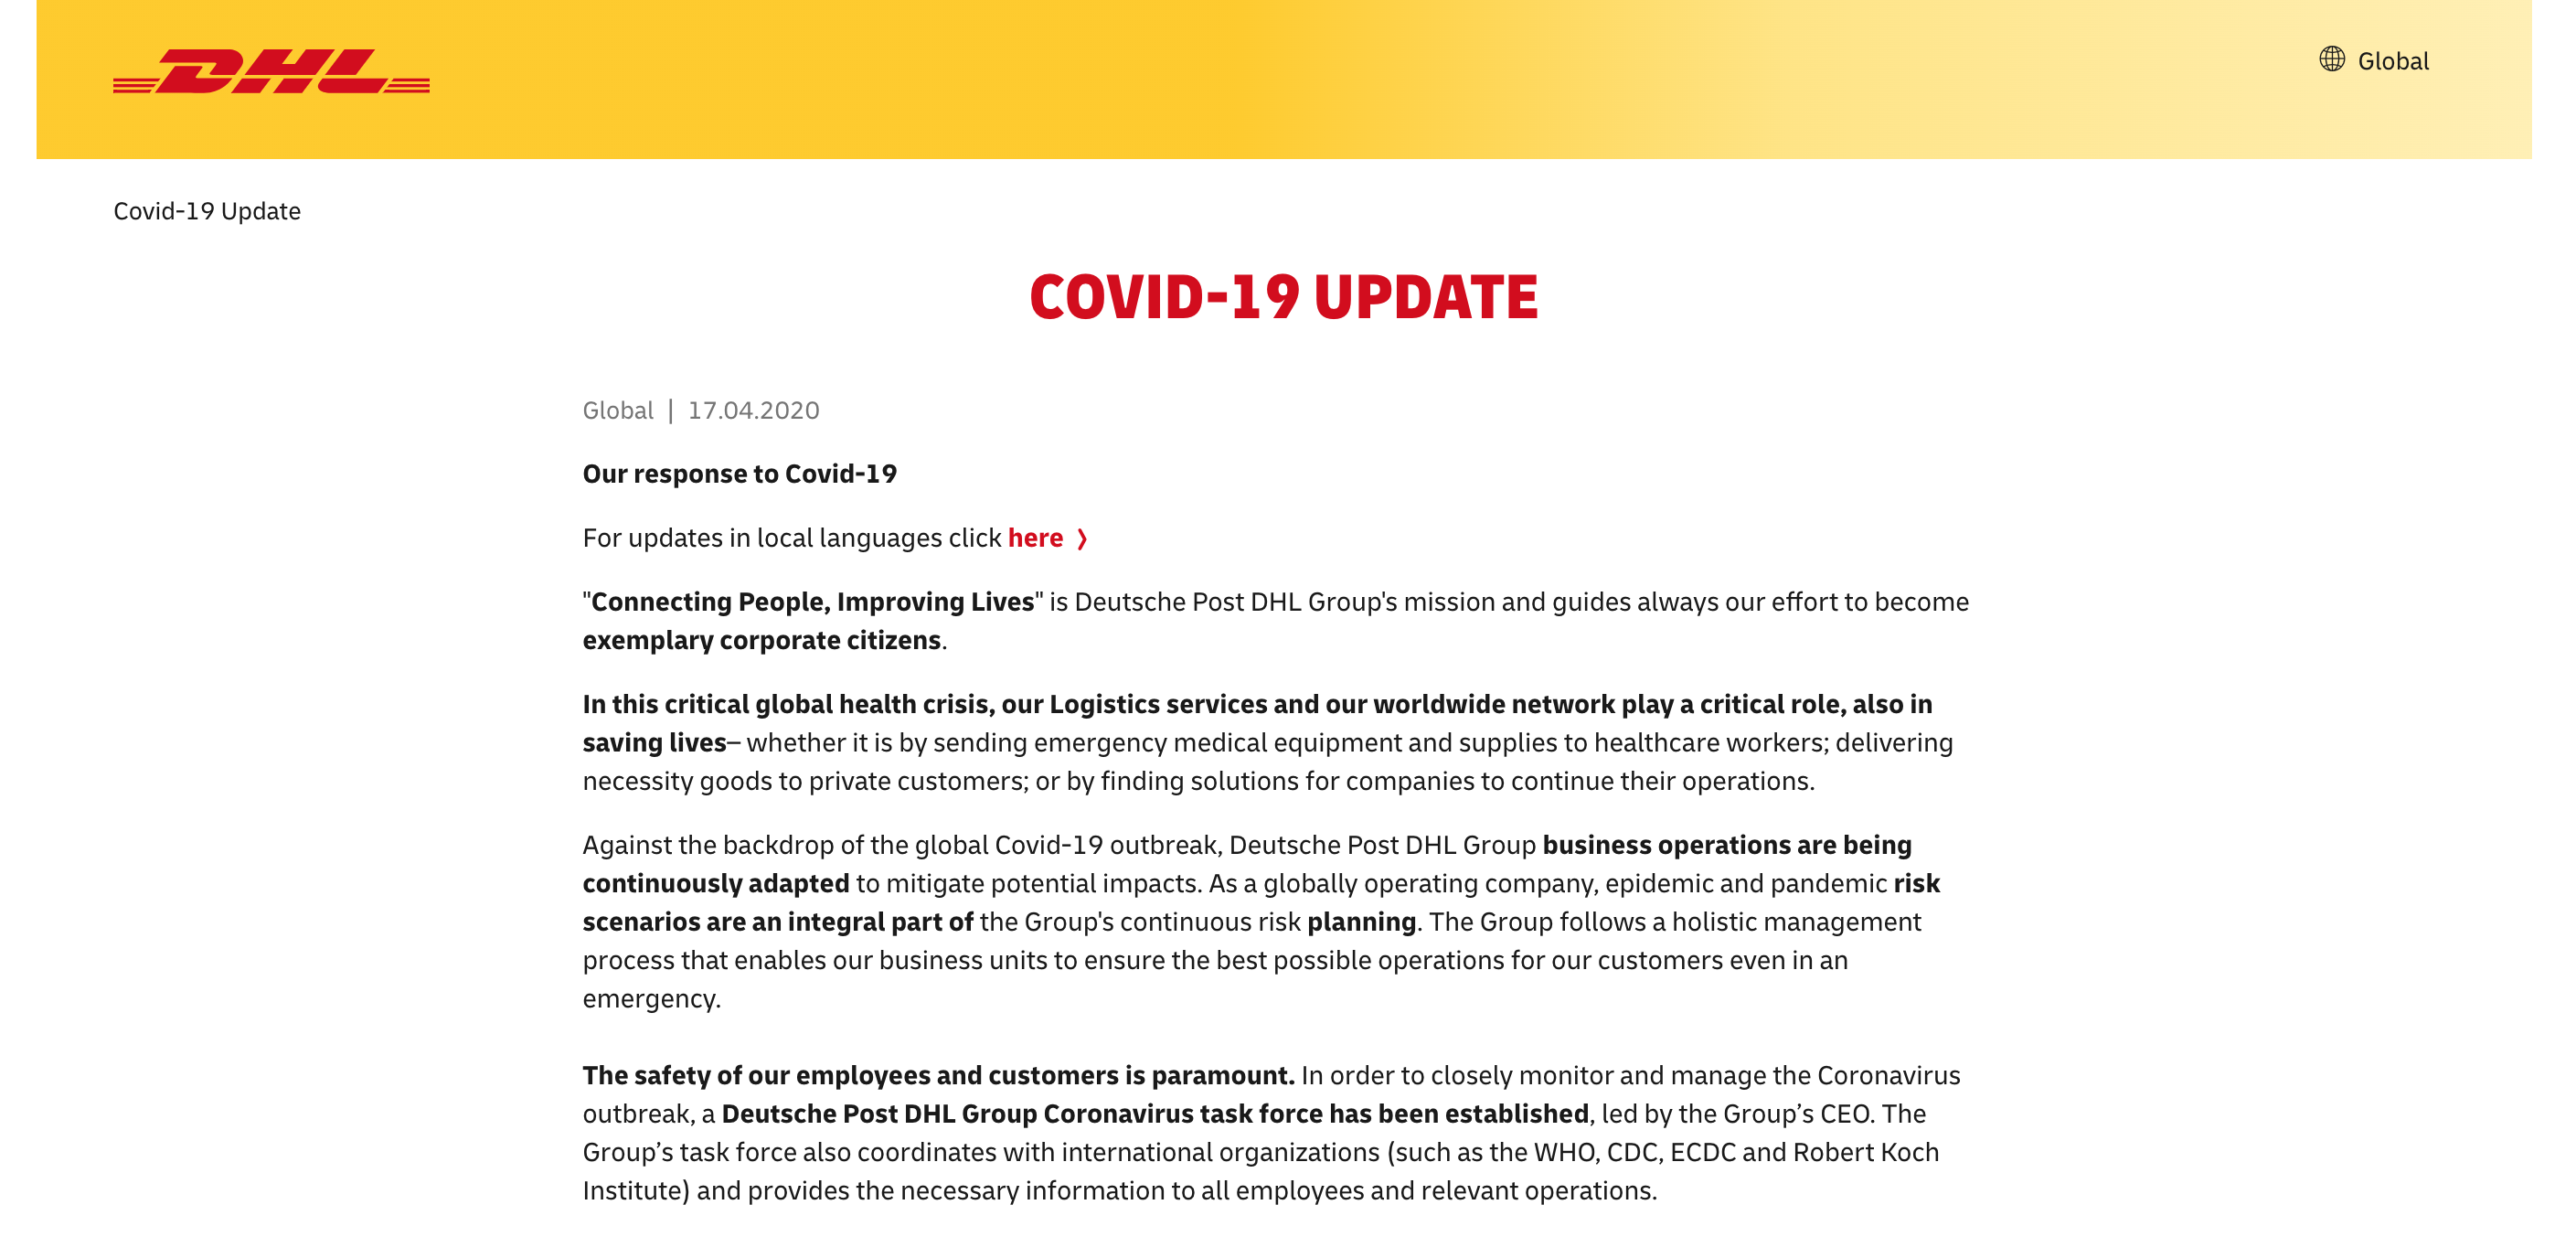 DHL's page for all COVID 19 related information